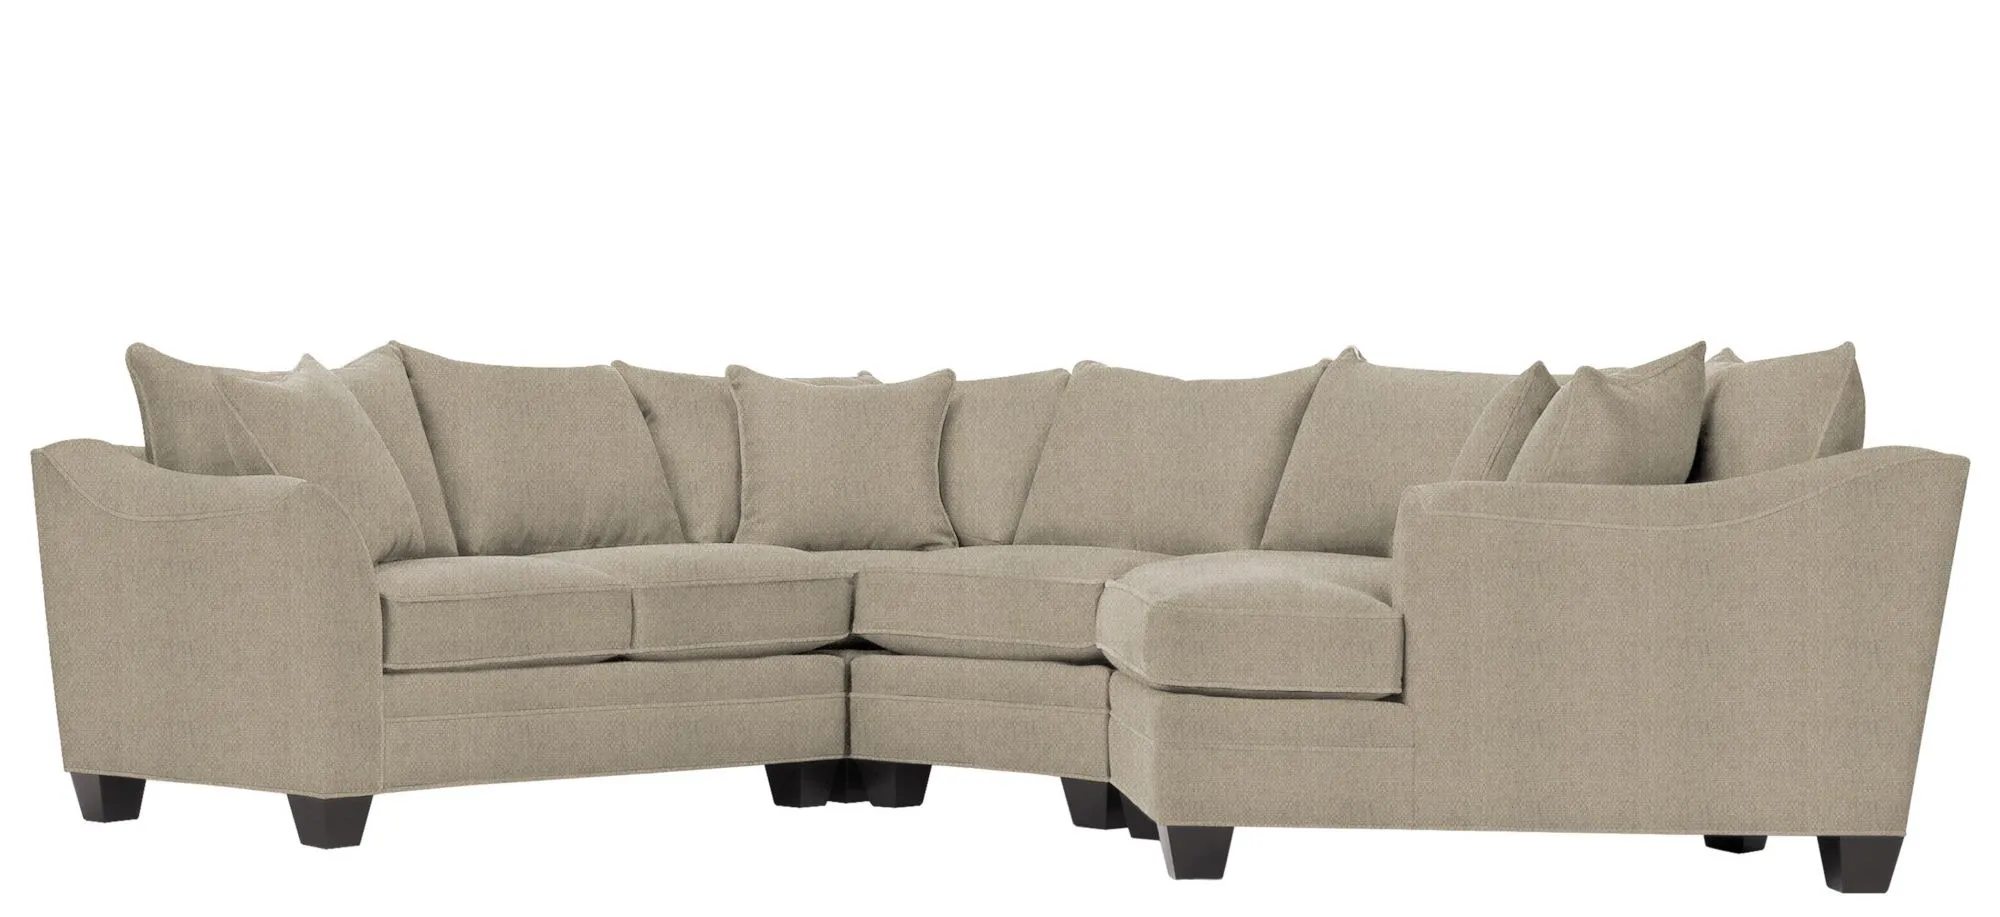 Foresthill 4-pc. Right Hand Cuddler Sectional Sofa in Sugar Shack Putty by H.M. Richards